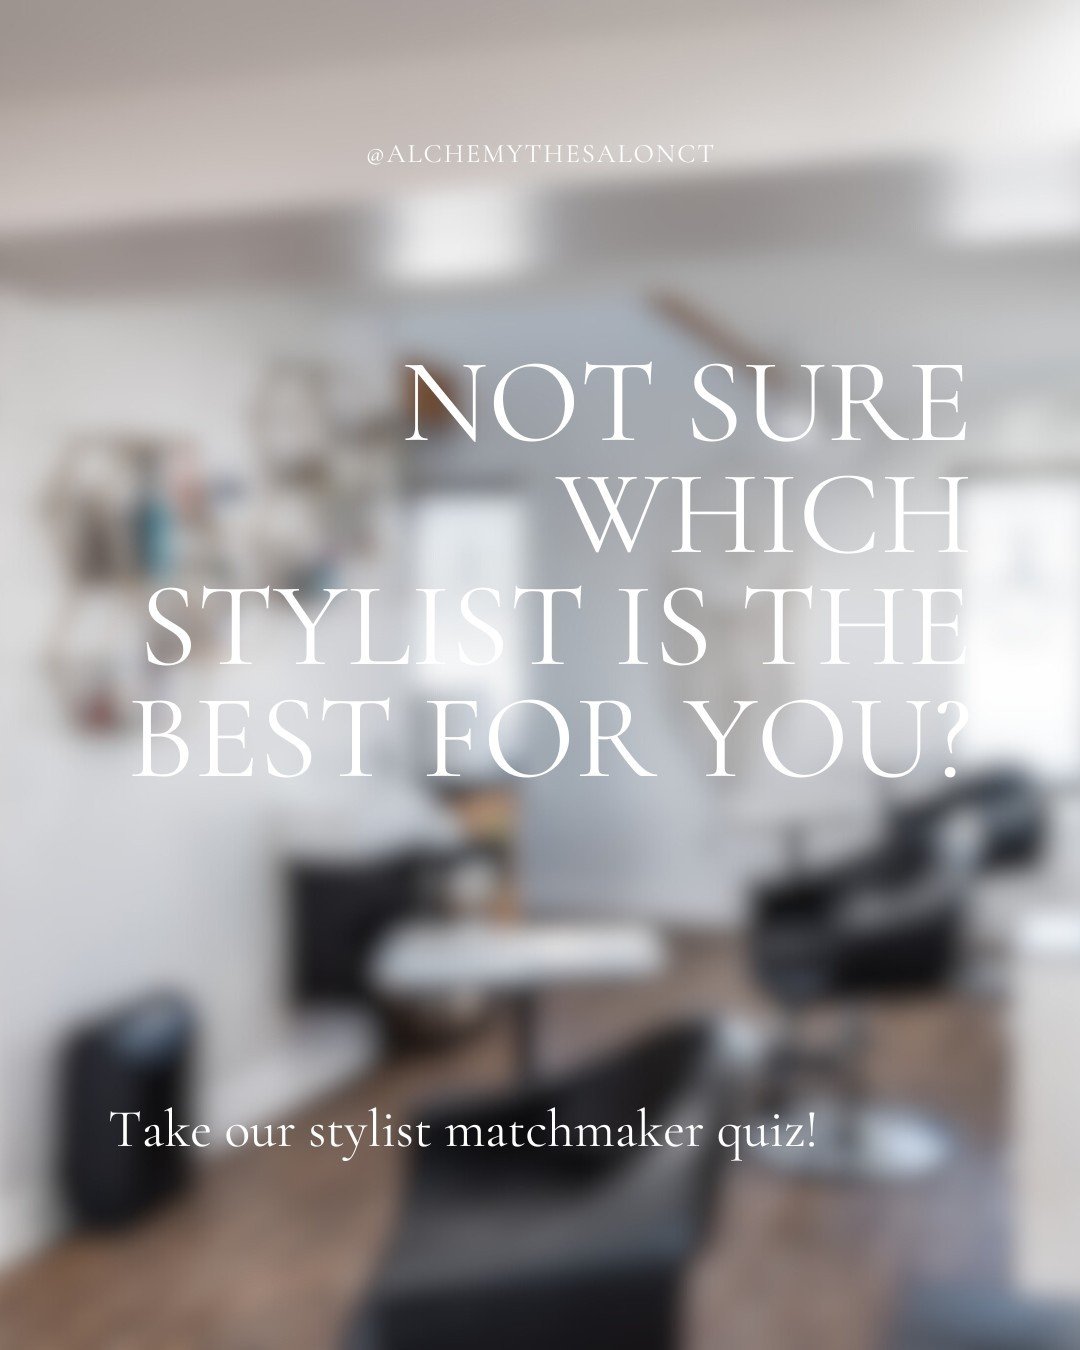 Don't worry, we're here to help you pick your perfect stylist. 😍

We know it can be intimidating to go to a new salon and try out a new stylist. That's why we created our stylist matchmaker quiz!

Just visit the &quot;Stylists&quot; tab on our websi